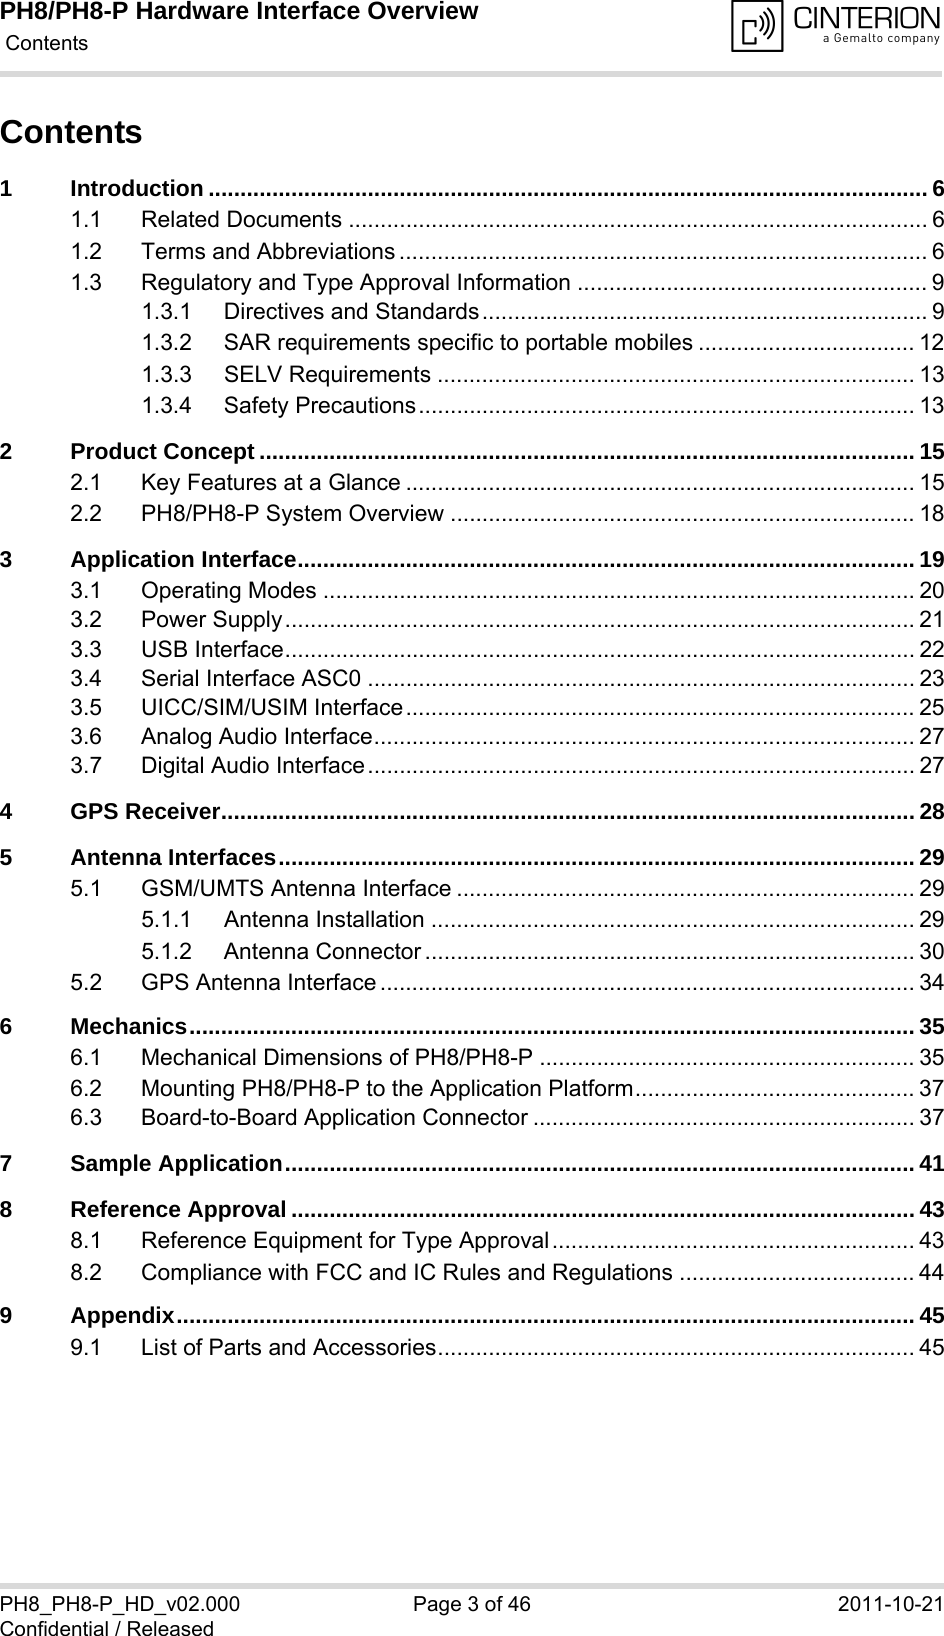 PH8/PH8-P Hardware Interface Overview Contents46PH8_PH8-P_HD_v02.000 Page 3 of 46 2011-10-21Confidential / ReleasedContents1 Introduction ................................................................................................................. 61.1 Related Documents ........................................................................................... 61.2 Terms and Abbreviations ................................................................................... 61.3 Regulatory and Type Approval Information ....................................................... 91.3.1 Directives and Standards...................................................................... 91.3.2 SAR requirements specific to portable mobiles .................................. 121.3.3 SELV Requirements ........................................................................... 131.3.4 Safety Precautions.............................................................................. 132 Product Concept ....................................................................................................... 152.1 Key Features at a Glance ................................................................................ 152.2 PH8/PH8-P System Overview ......................................................................... 183 Application Interface................................................................................................. 193.1 Operating Modes ............................................................................................. 203.2 Power Supply................................................................................................... 213.3 USB Interface................................................................................................... 223.4 Serial Interface ASC0 ...................................................................................... 233.5 UICC/SIM/USIM Interface................................................................................ 253.6 Analog Audio Interface..................................................................................... 273.7 Digital Audio Interface...................................................................................... 274 GPS Receiver............................................................................................................. 285 Antenna Interfaces.................................................................................................... 295.1 GSM/UMTS Antenna Interface ........................................................................ 295.1.1 Antenna Installation ............................................................................ 295.1.2 Antenna Connector ............................................................................. 305.2 GPS Antenna Interface .................................................................................... 346 Mechanics.................................................................................................................. 356.1 Mechanical Dimensions of PH8/PH8-P ........................................................... 356.2 Mounting PH8/PH8-P to the Application Platform............................................ 376.3 Board-to-Board Application Connector ............................................................ 377 Sample Application................................................................................................... 418 Reference Approval .................................................................................................. 438.1 Reference Equipment for Type Approval......................................................... 438.2 Compliance with FCC and IC Rules and Regulations ..................................... 449 Appendix.................................................................................................................... 459.1 List of Parts and Accessories........................................................................... 45